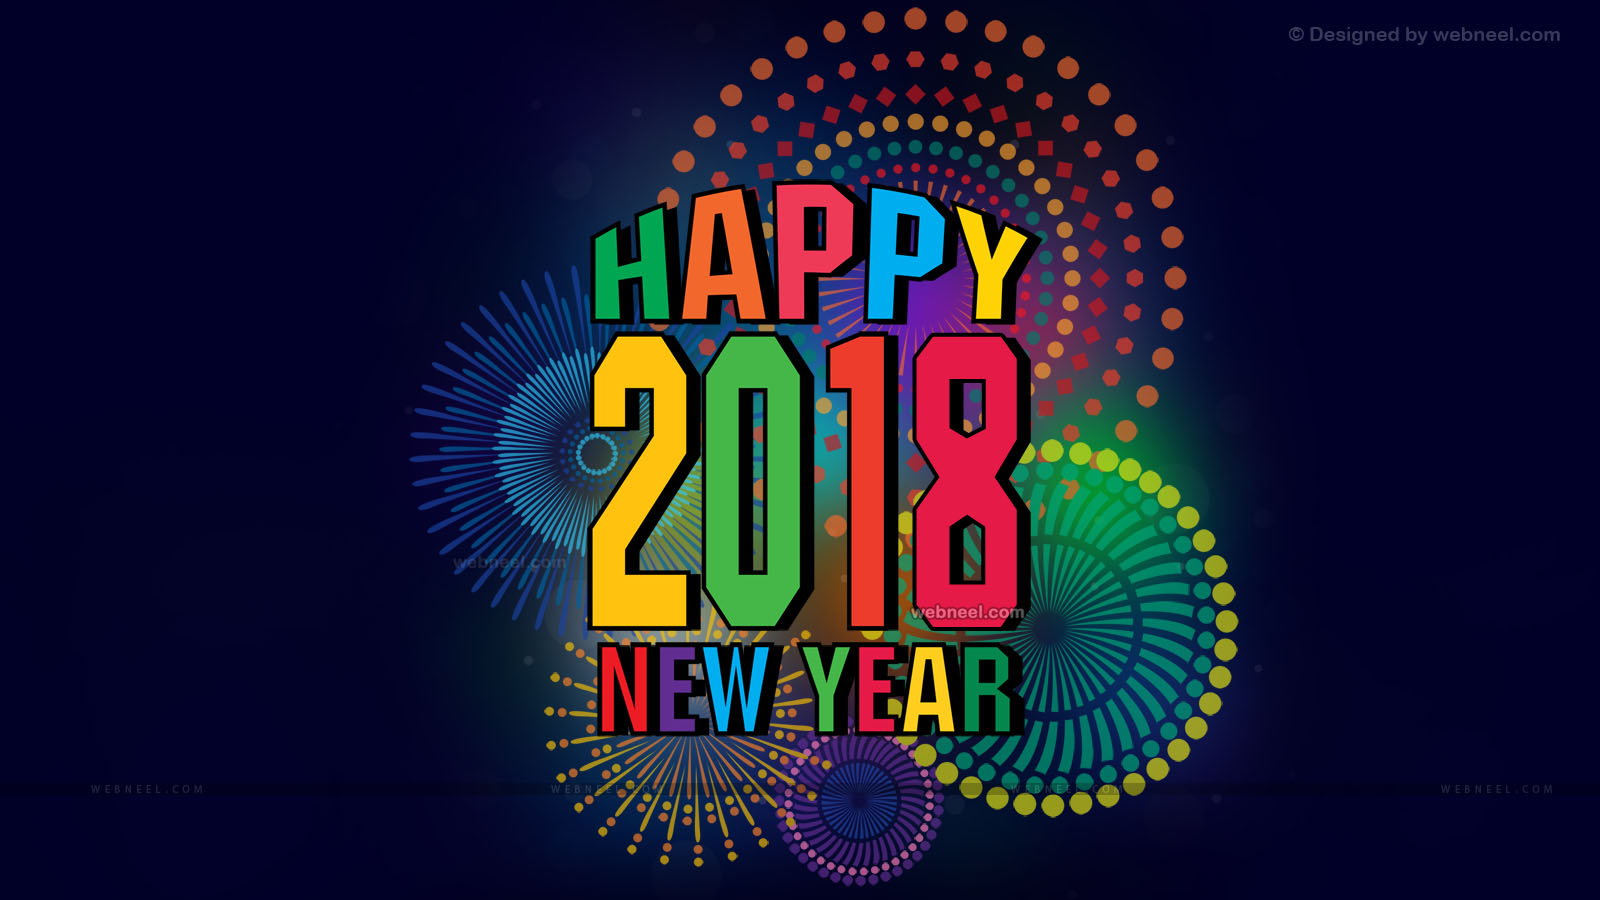 2018 Wallpaper Happy New Year 2018 Happy New Year HD Wallpapers Download Free Map Images Wallpaper [wallpaper684.blogspot.com]